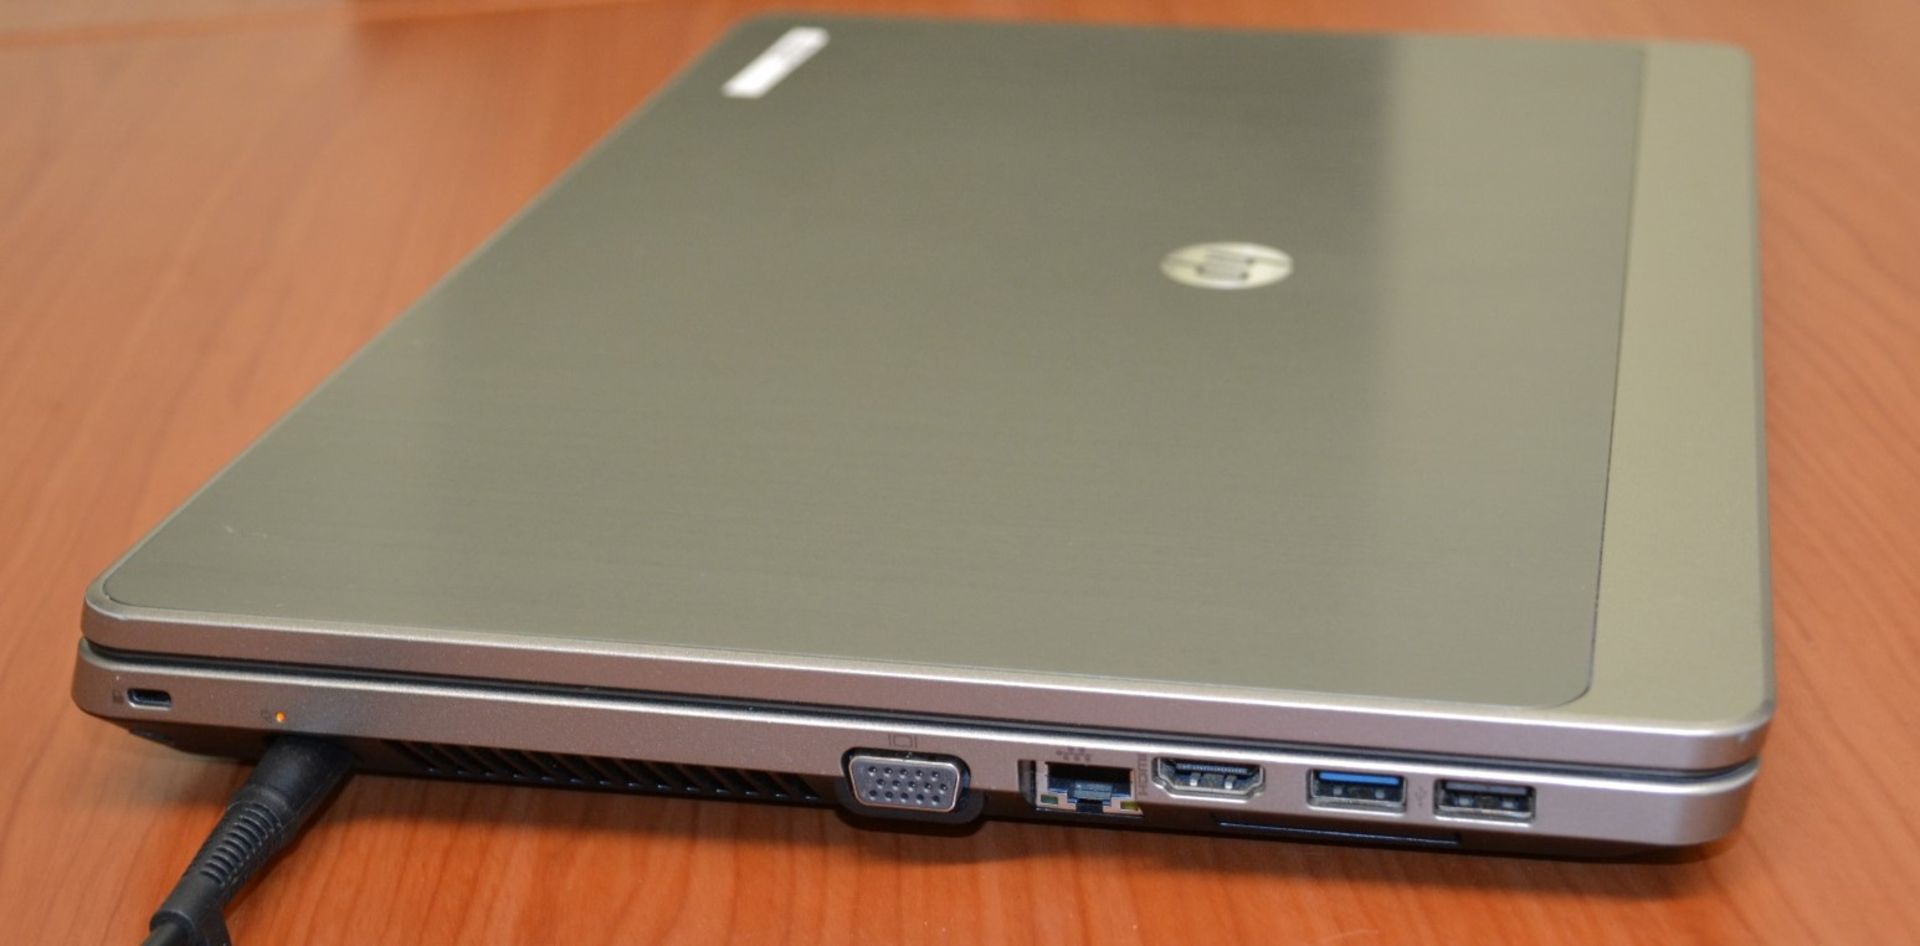 1 x HP Probook 4535s Laptop Computer - 15.6 Inch Screen Size - Features  AMD A4-3305M Dual Core - Image 2 of 6